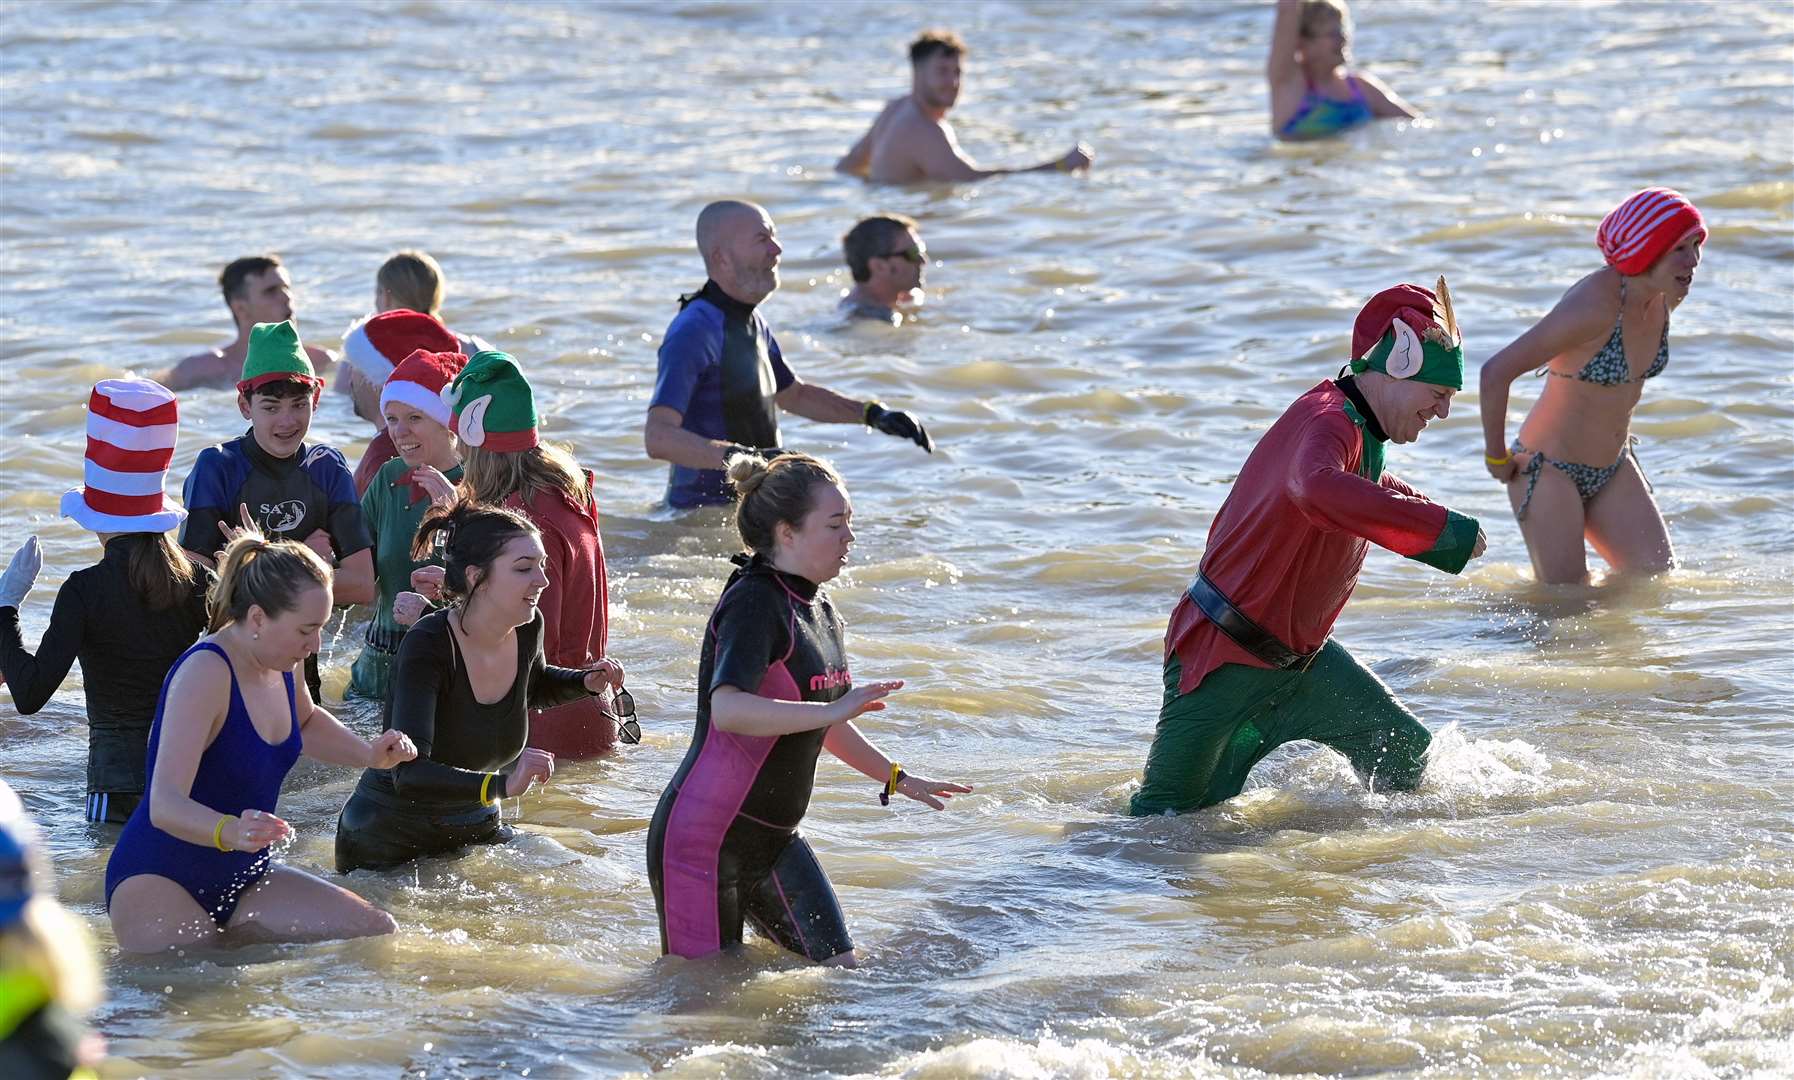 A cold swim on Boxing Day has become a popular tradition